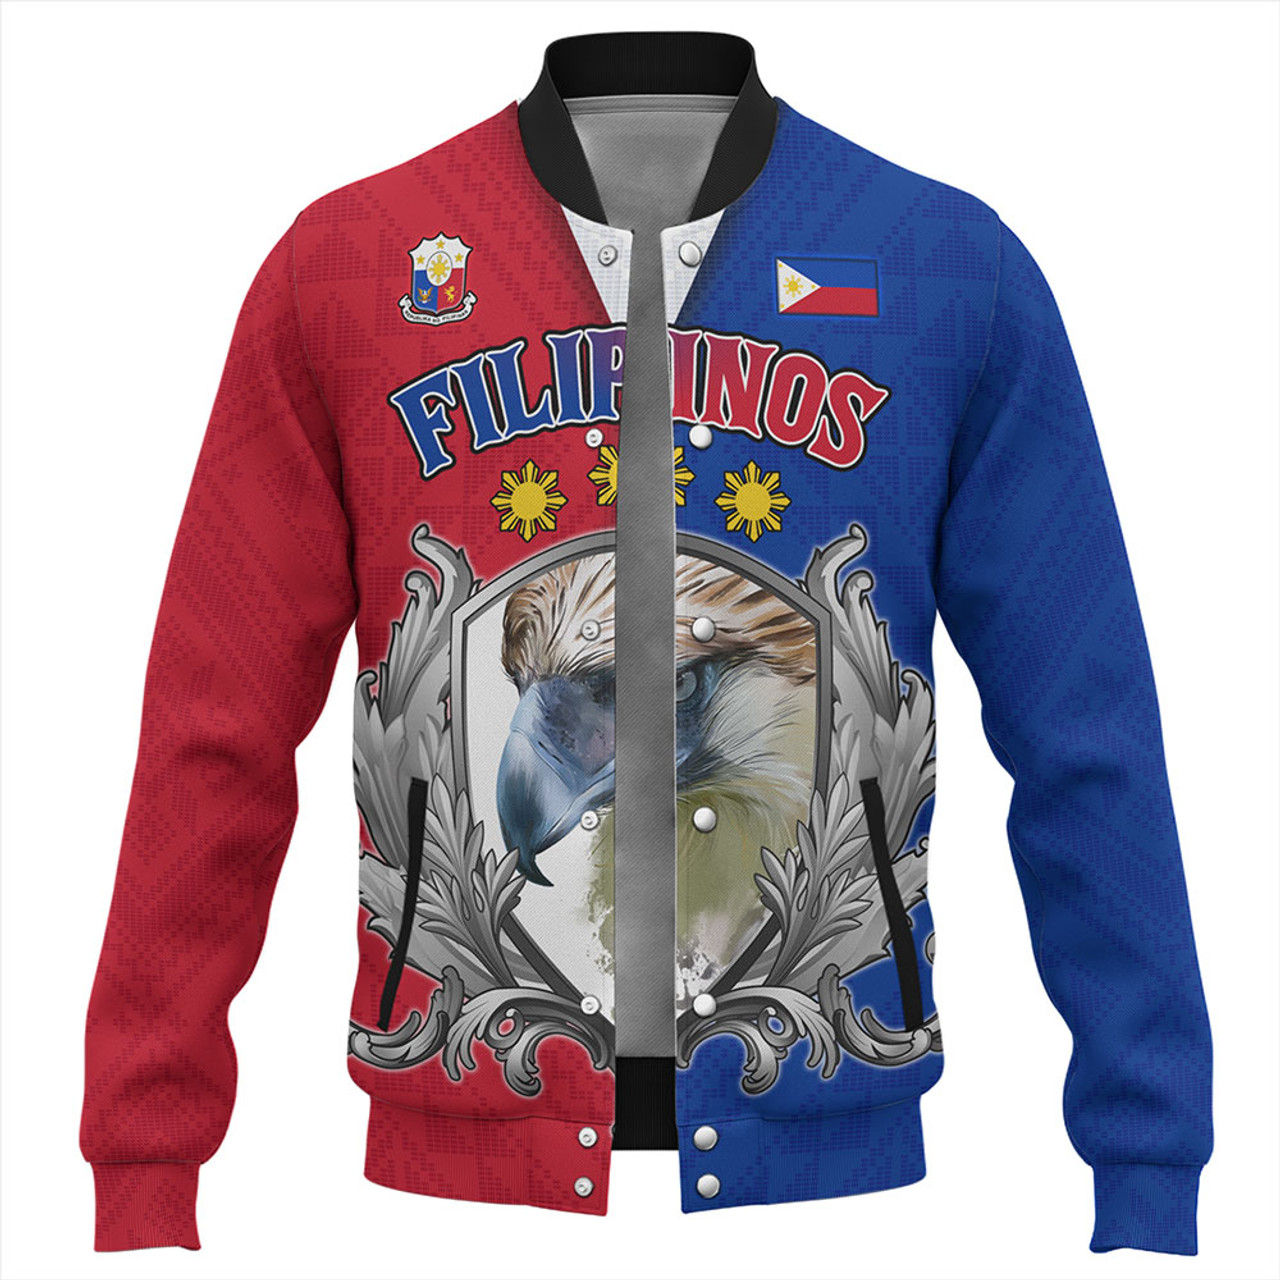 Philippines Filipinos Baseball Jacket The Philippine Eagle With Traditional Patterns